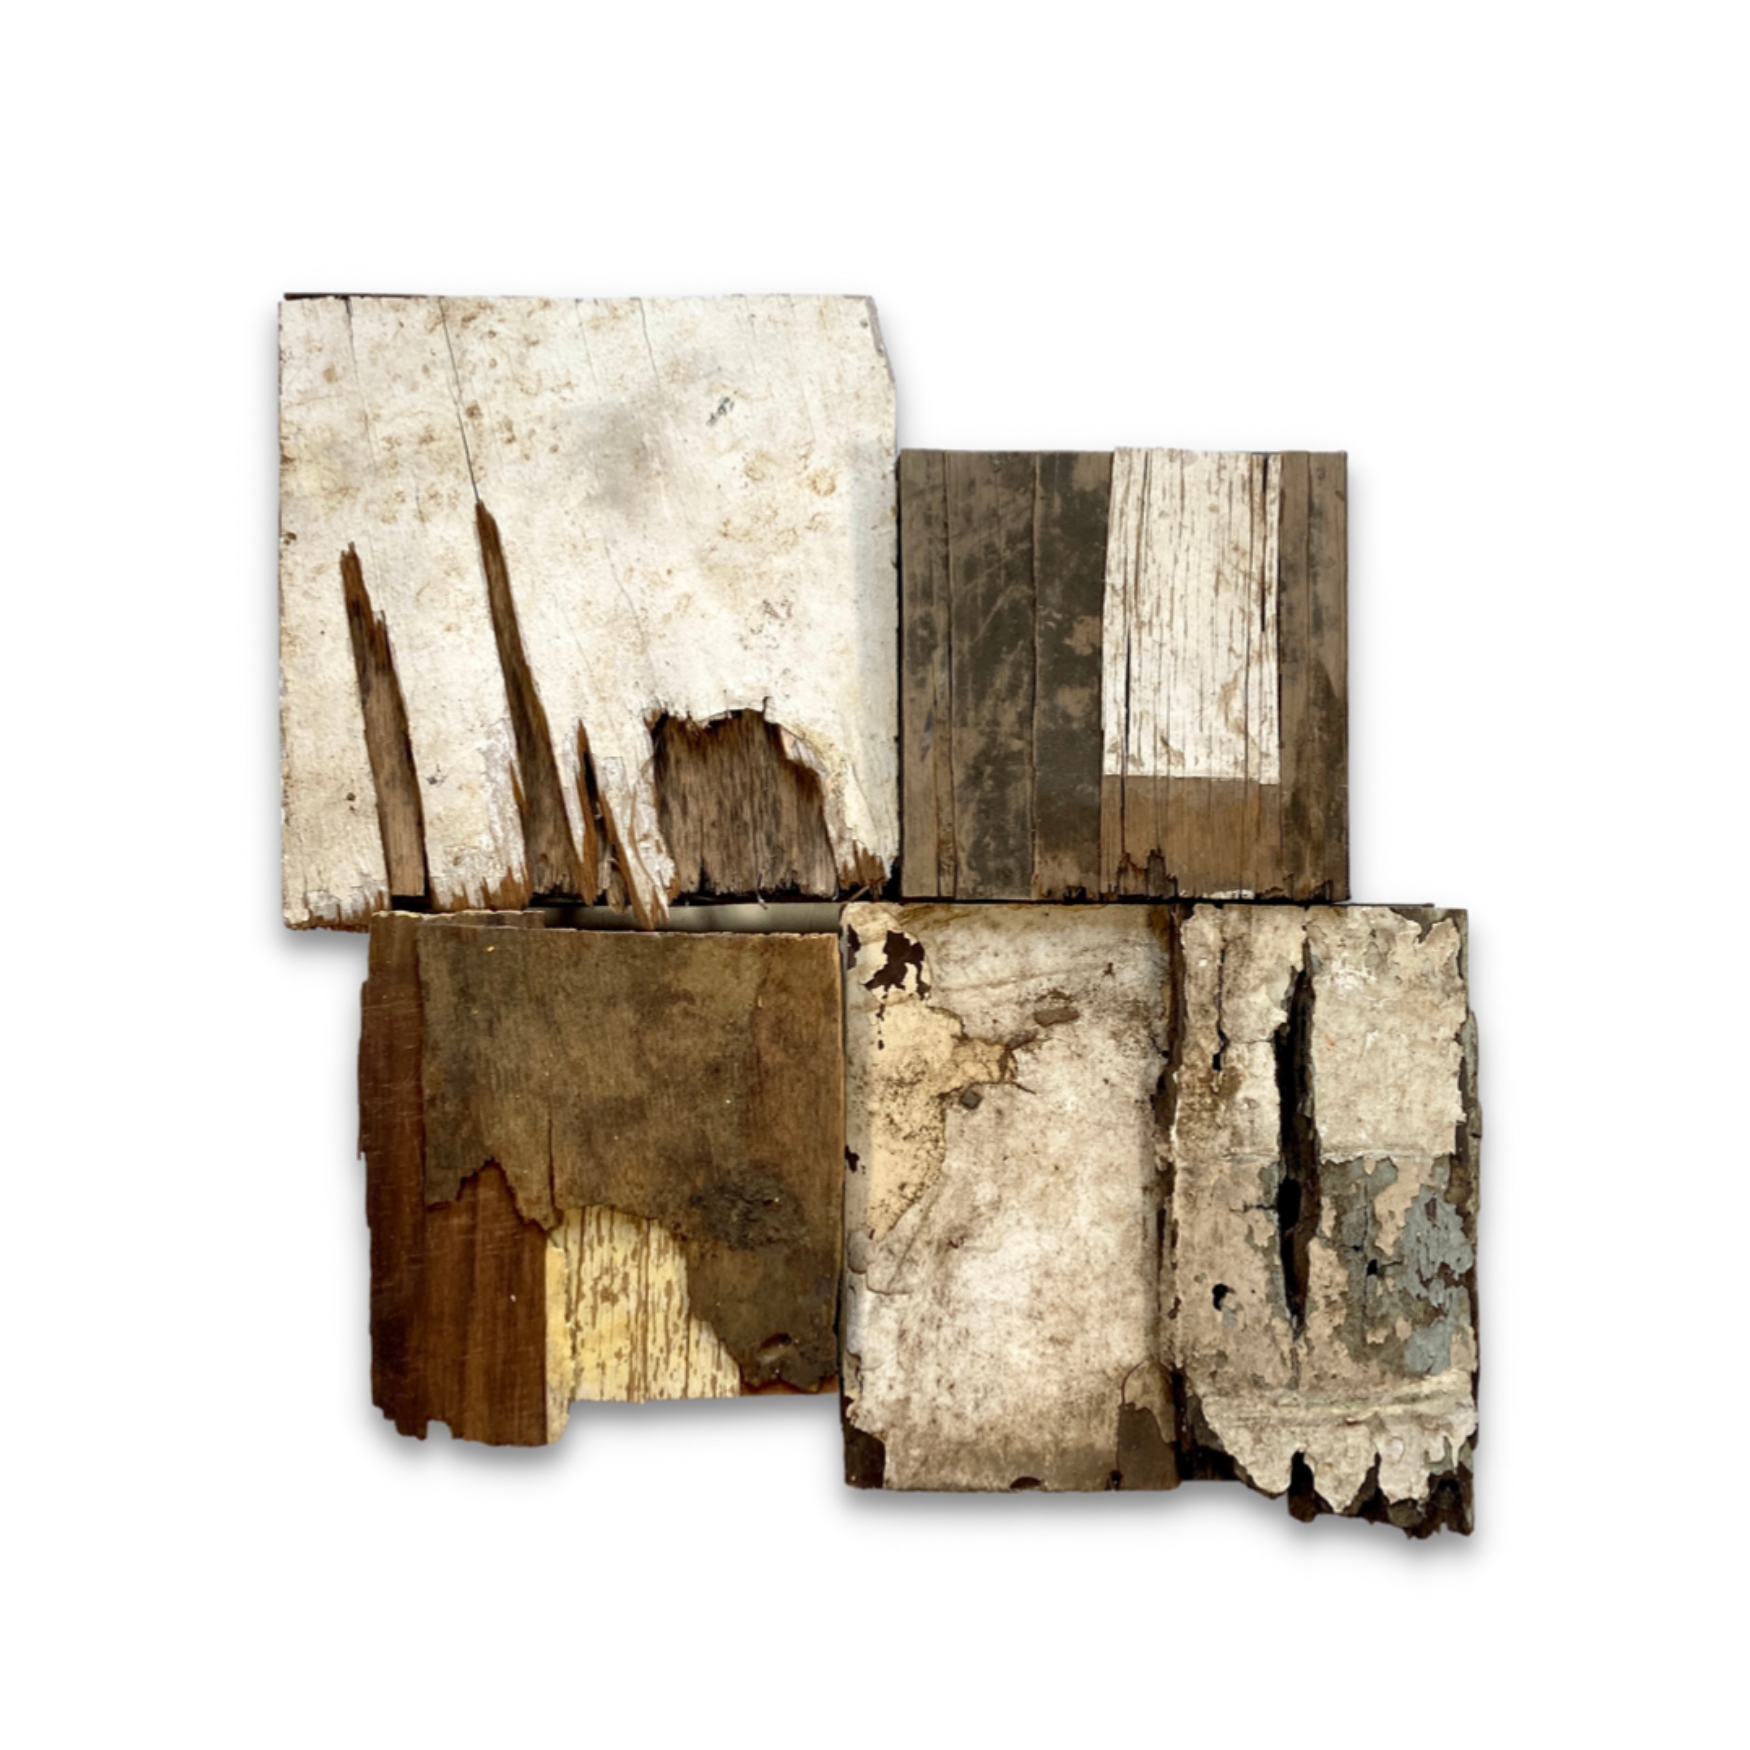 Ivannia LassoCrowded Spaces, 2022.Reclaimed wood and mixed media16 1⁄2 x 15 3⁄4 inches